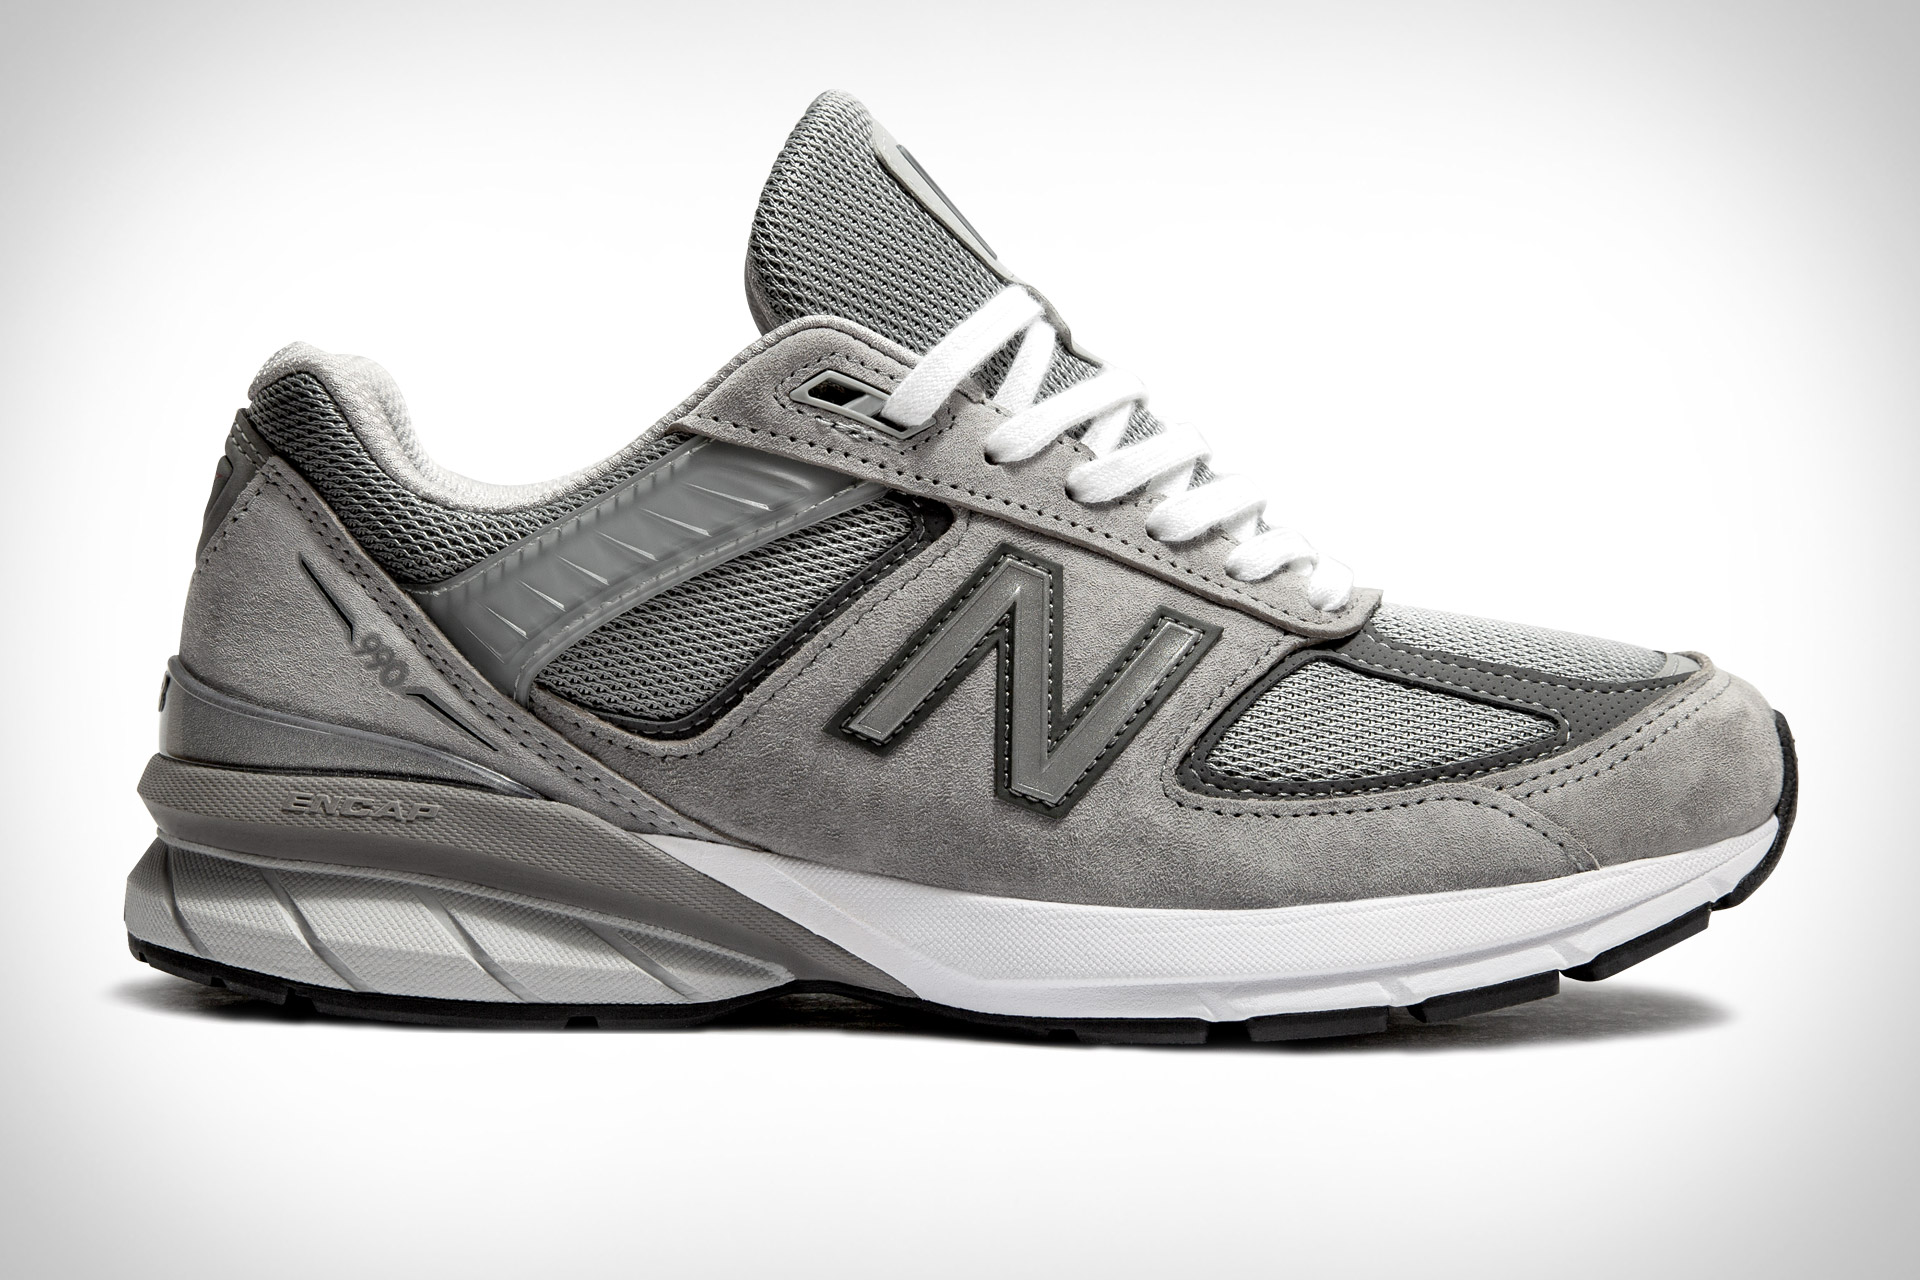 New Balance 990v5 Sneaker | Uncrate